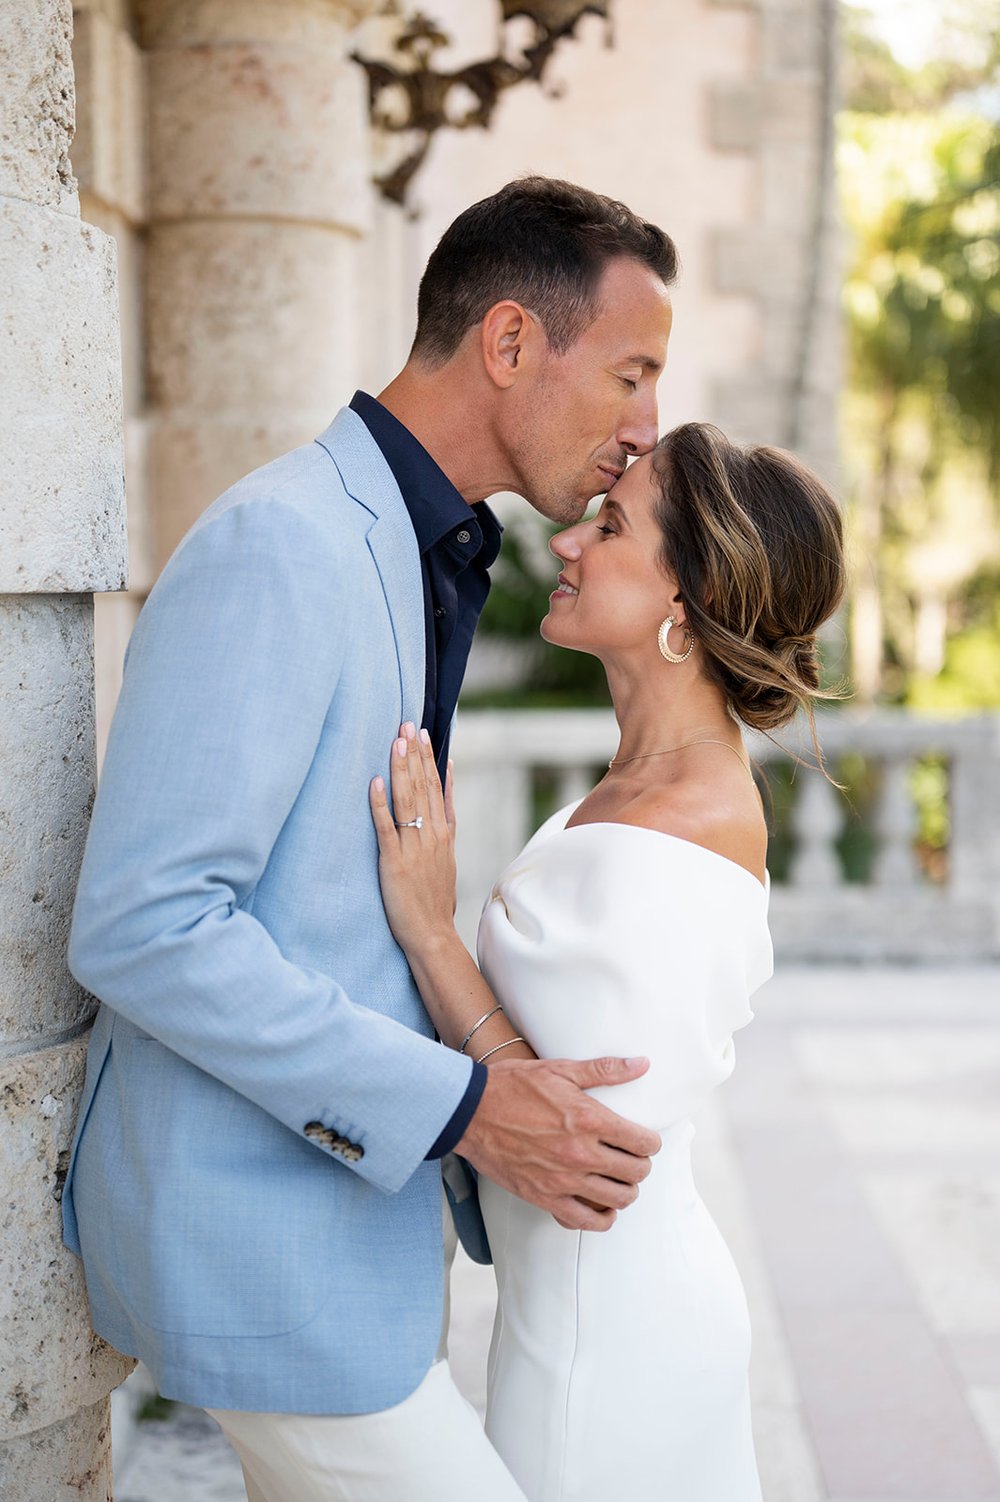  The Vizcaya Museum and Gardens Engagement 